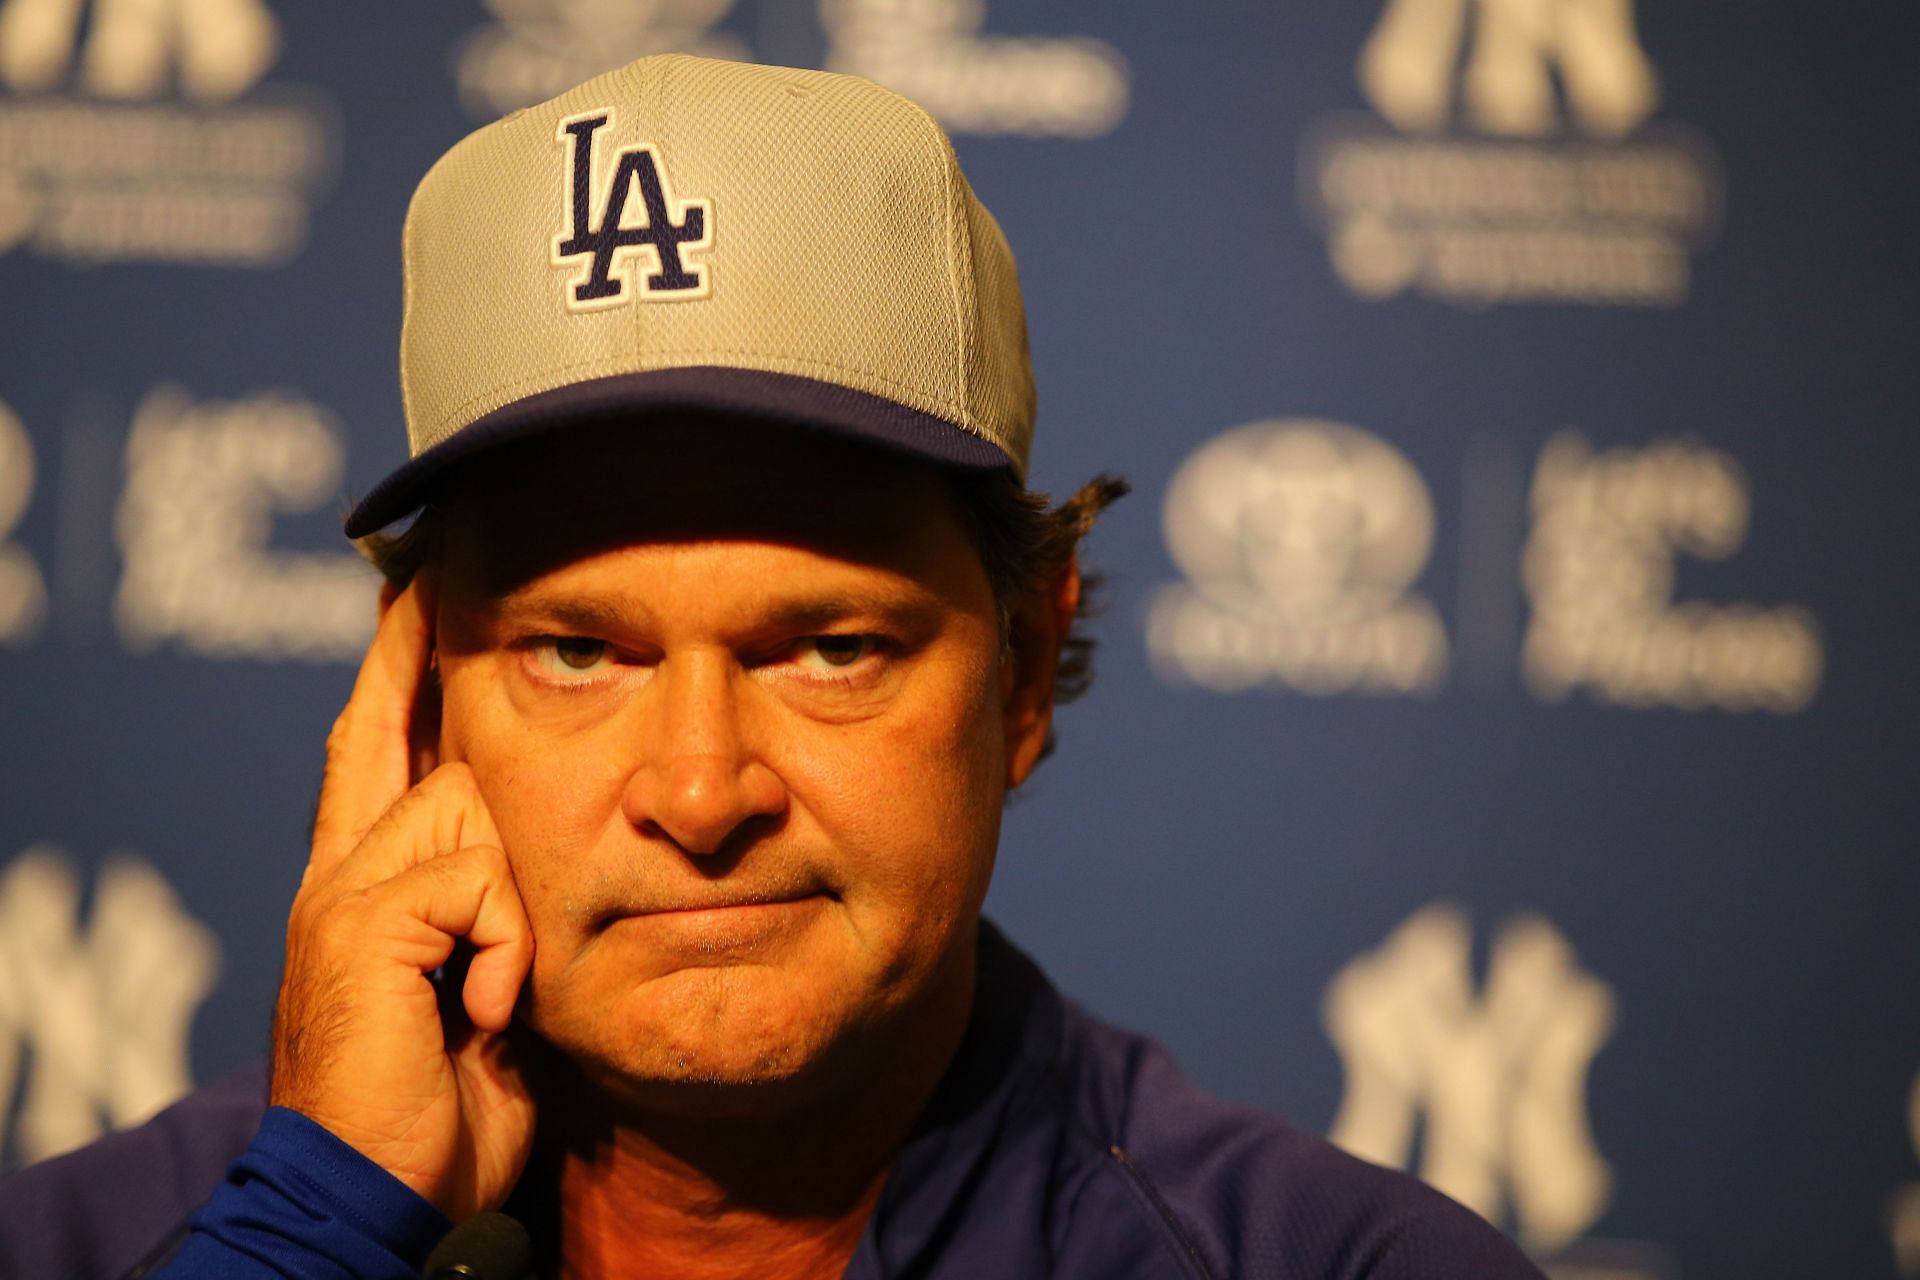 Blue Jays fans poke fun at Yankees fanbase after landing former Bombers  captain Don Mattingly in coaching role